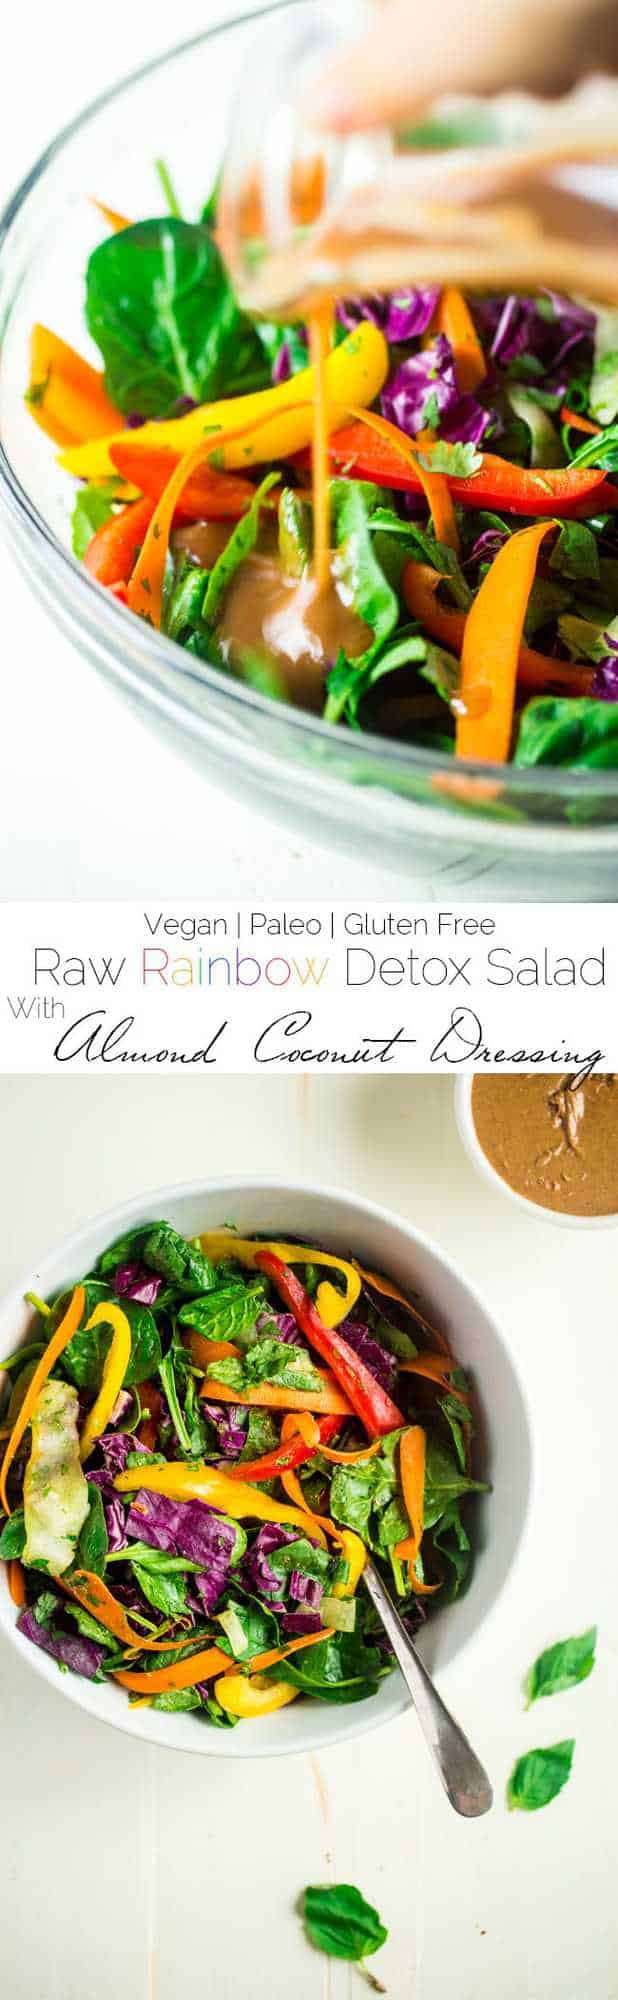 Paleo and Vegan Raw Summer Roll Salad with Almond Vinaigrette - This easy, raw salad tastes just like a summer roll, but without all the work! It's a healthy meal that's ready in 15 minutes and under 250 calories! Whole30 option included! | Foodfaithfitness.com | @FoodFaithFit